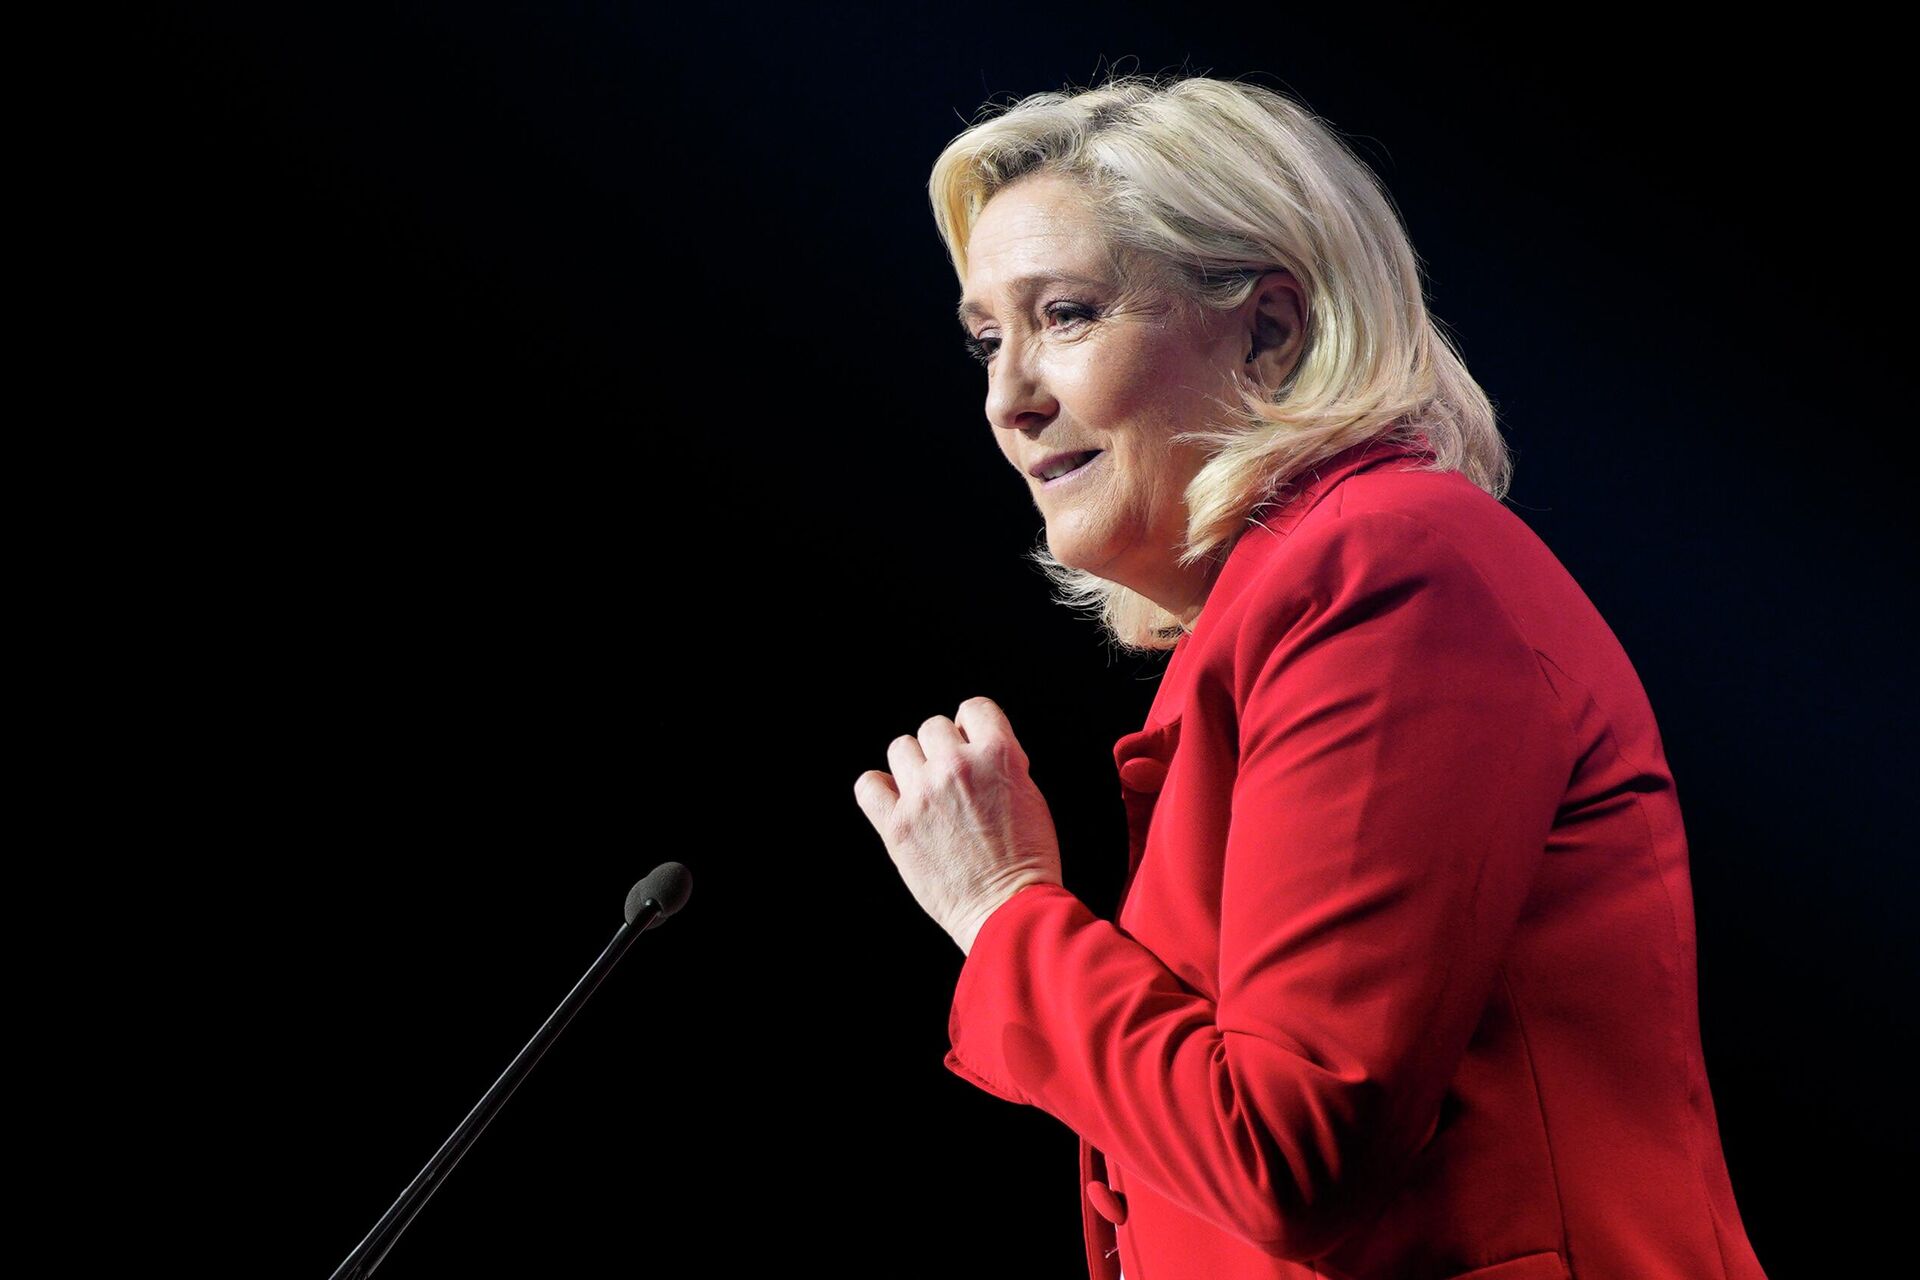 French right-wing politician Marine Le Pen delivers a speech during a meeting in Avignon, south of France, Thursday, April 14, 2022. Le Pen is trying to unseat centrist President Emmanuel Macron, who has a slim lead in polls ahead of France's April 24 presidential runoff election. (AP Photo/Daniel Cole) - Sputnik International, 1920, 11.01.2023